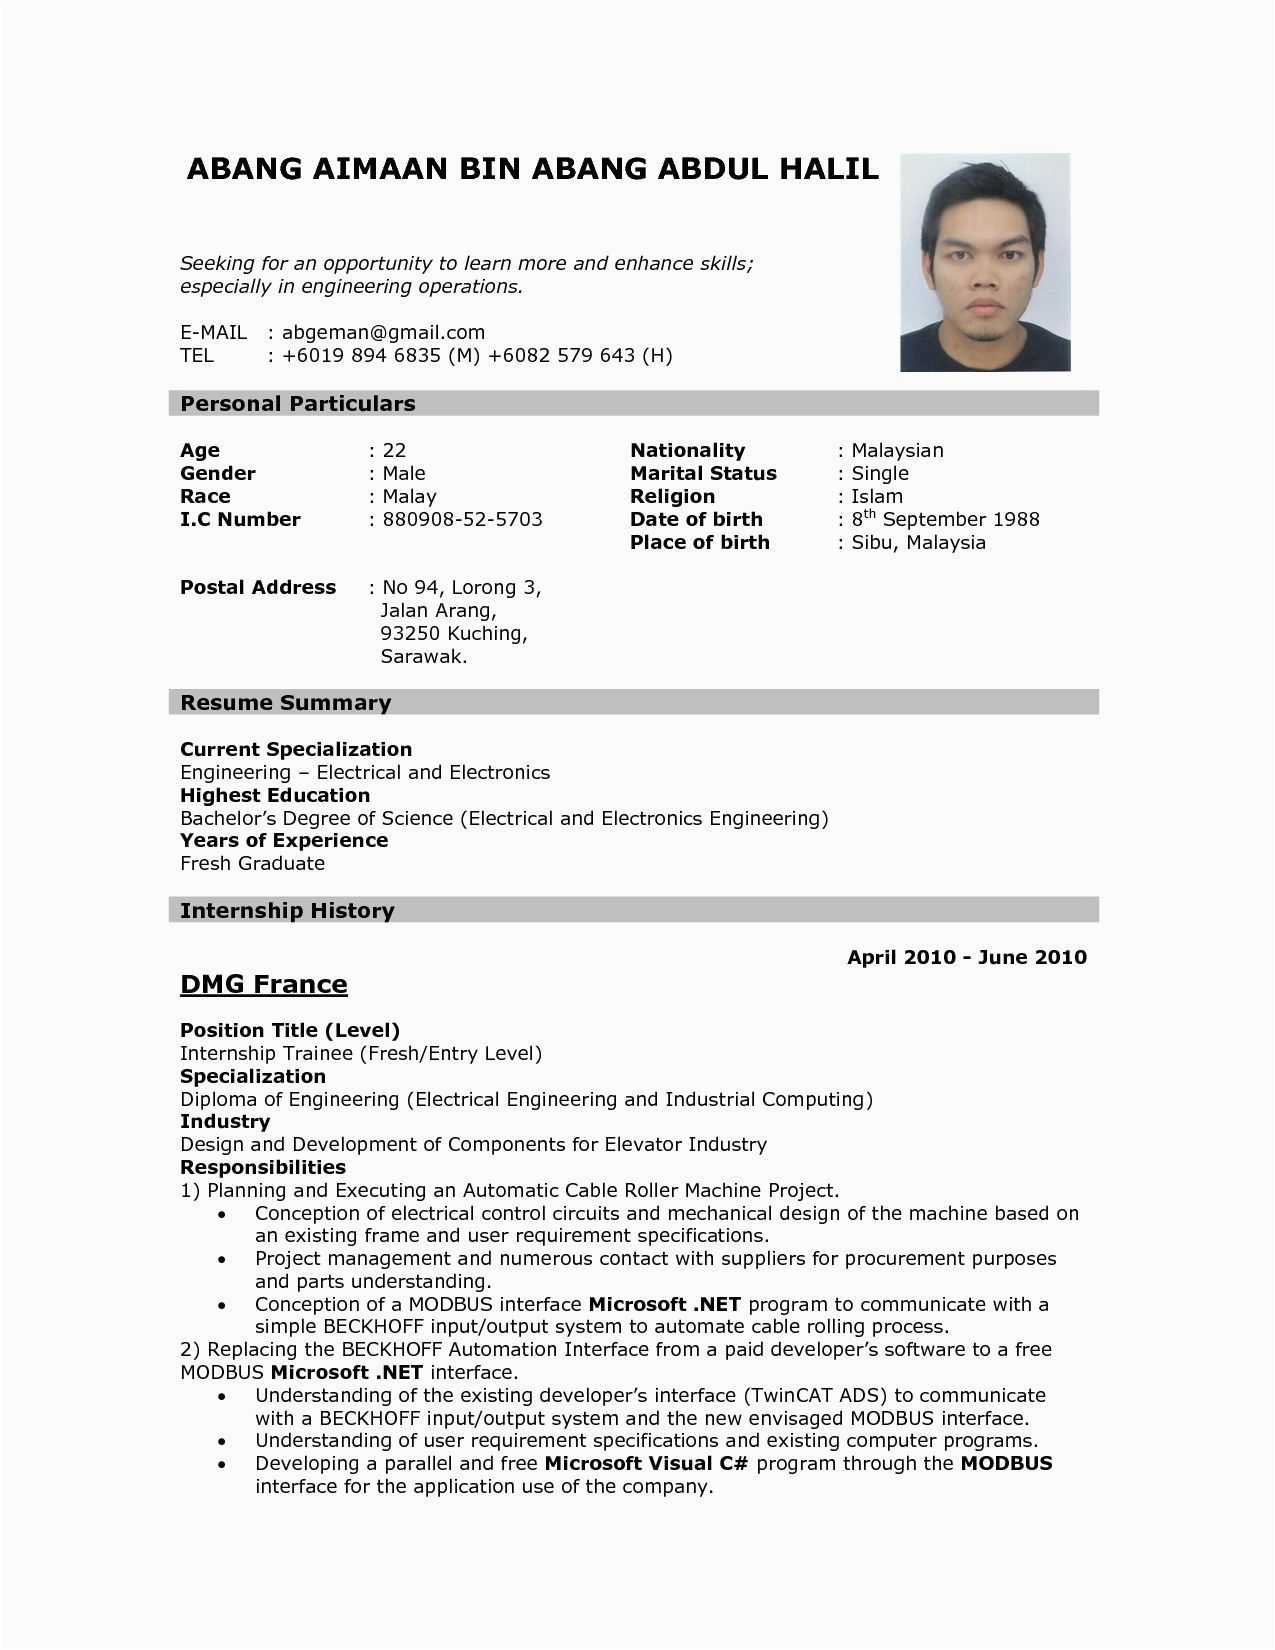 Sample Objectives In Resume for Applying A Job Nice Sample Resume for Applying Job with Images